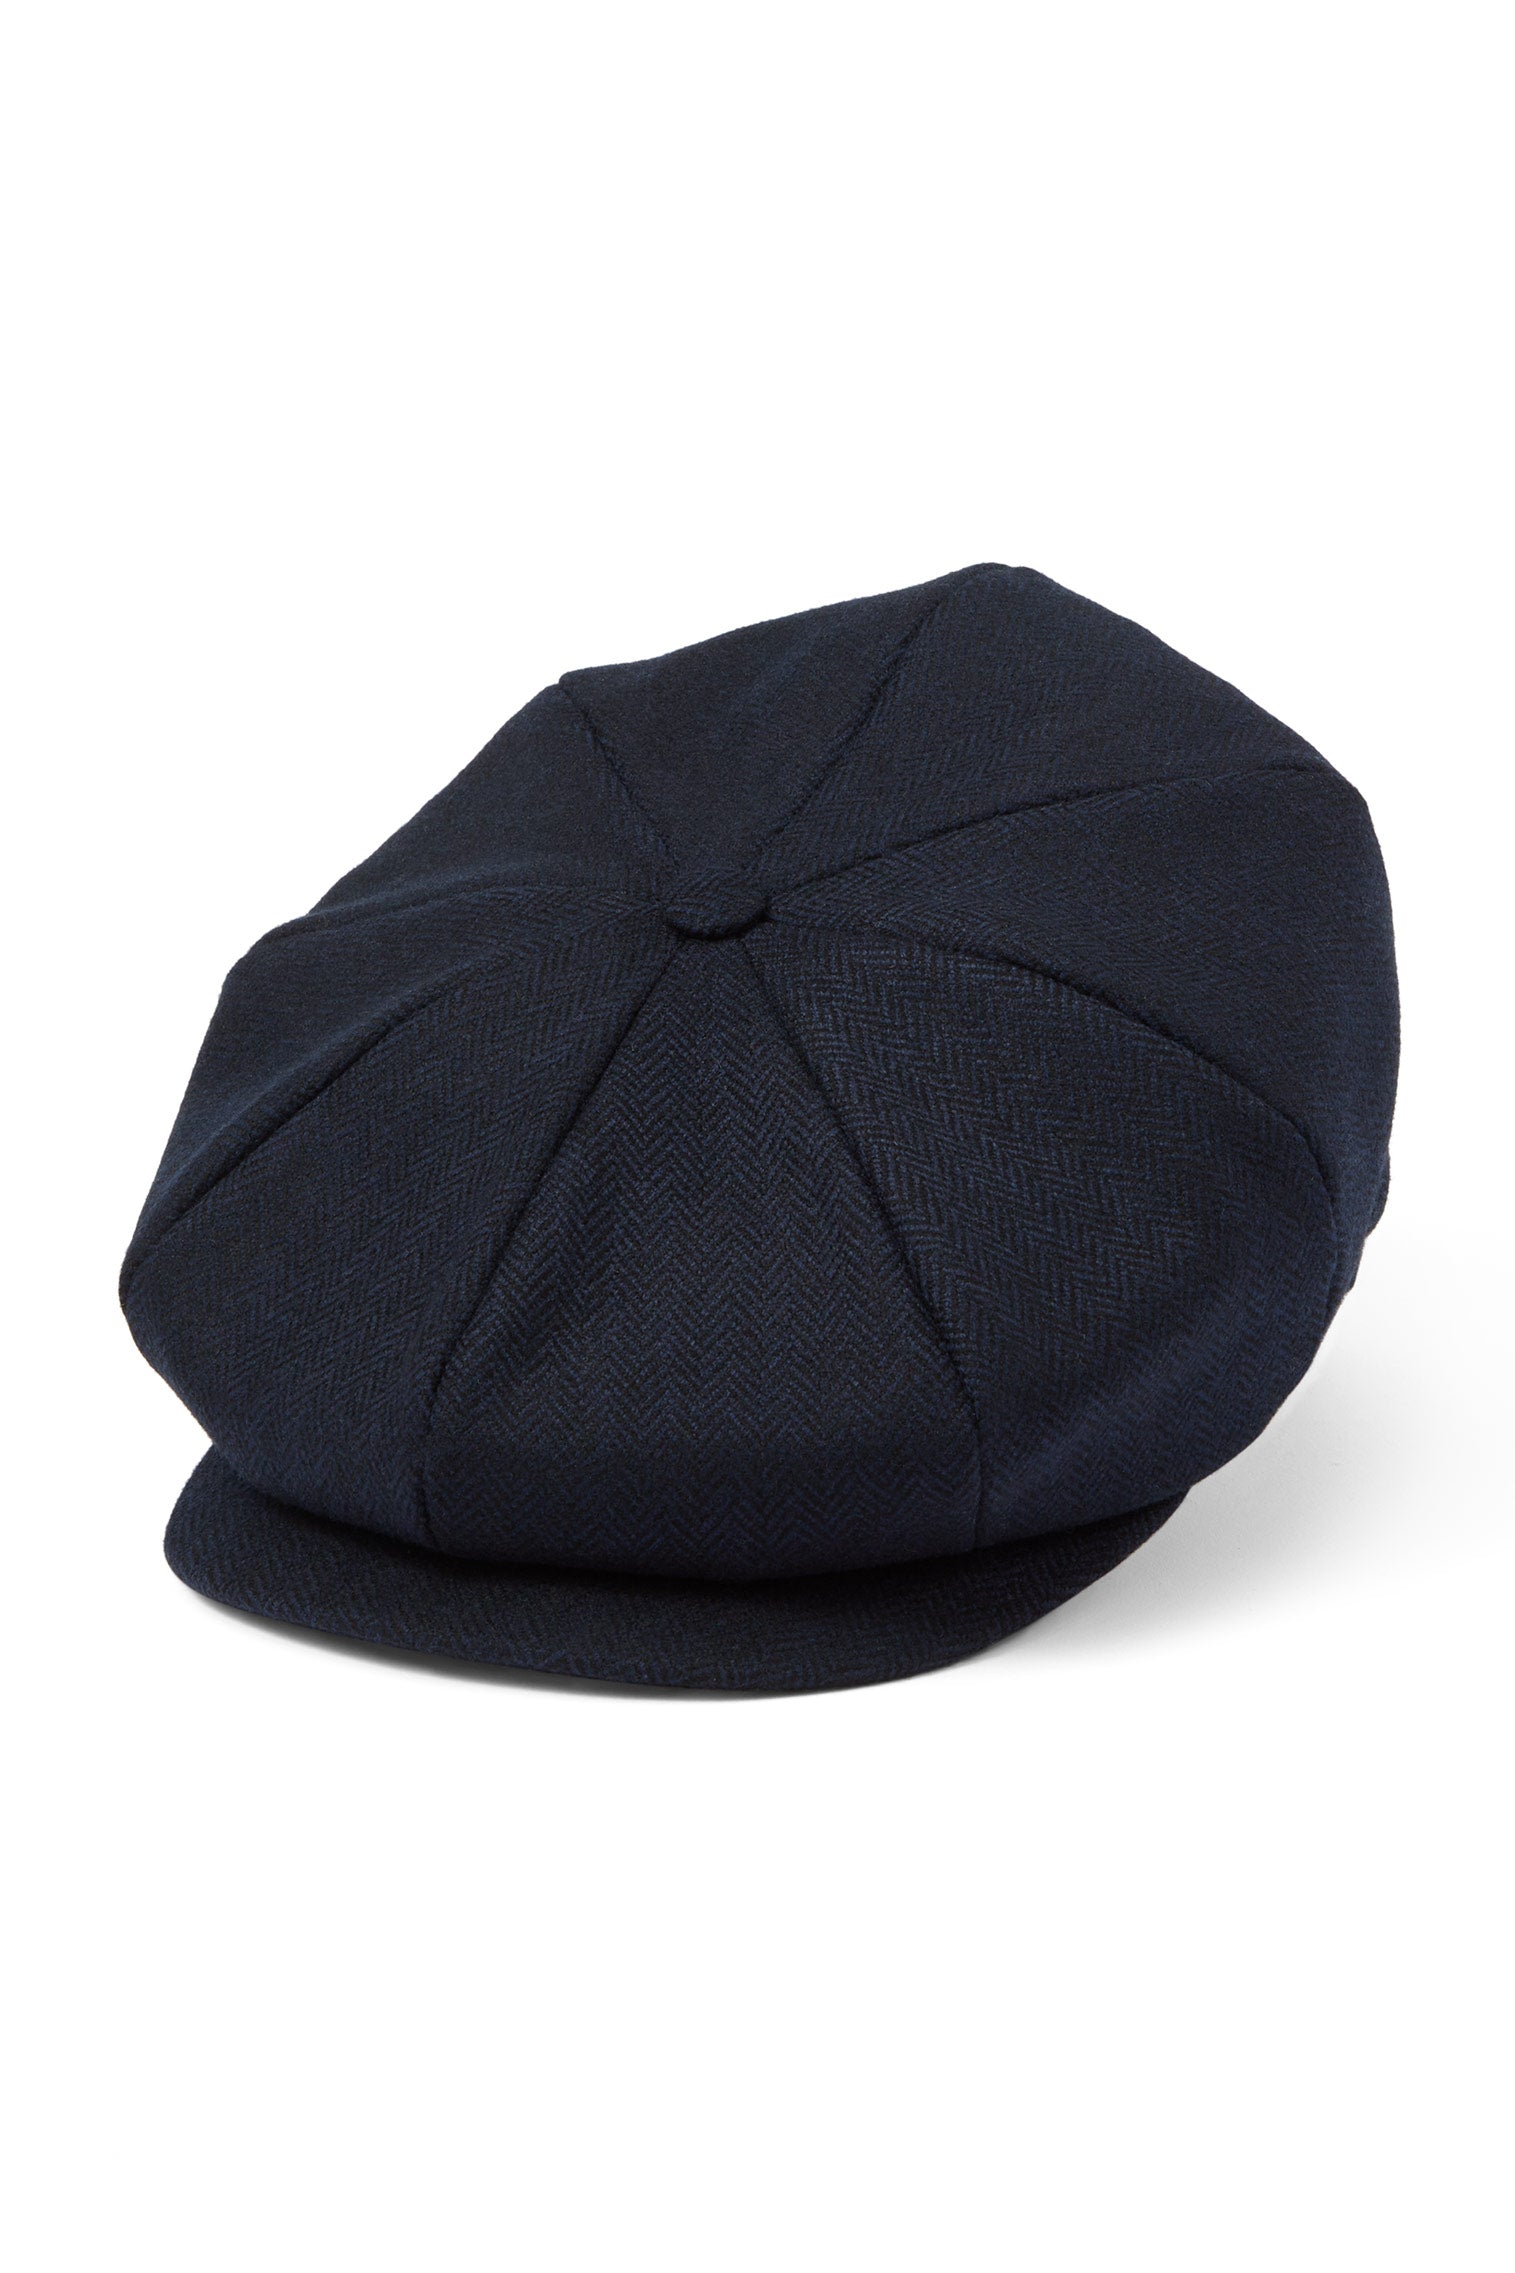 The Sixty - Hats for Slimmer Frames - Lock & Co. Hatters London UK